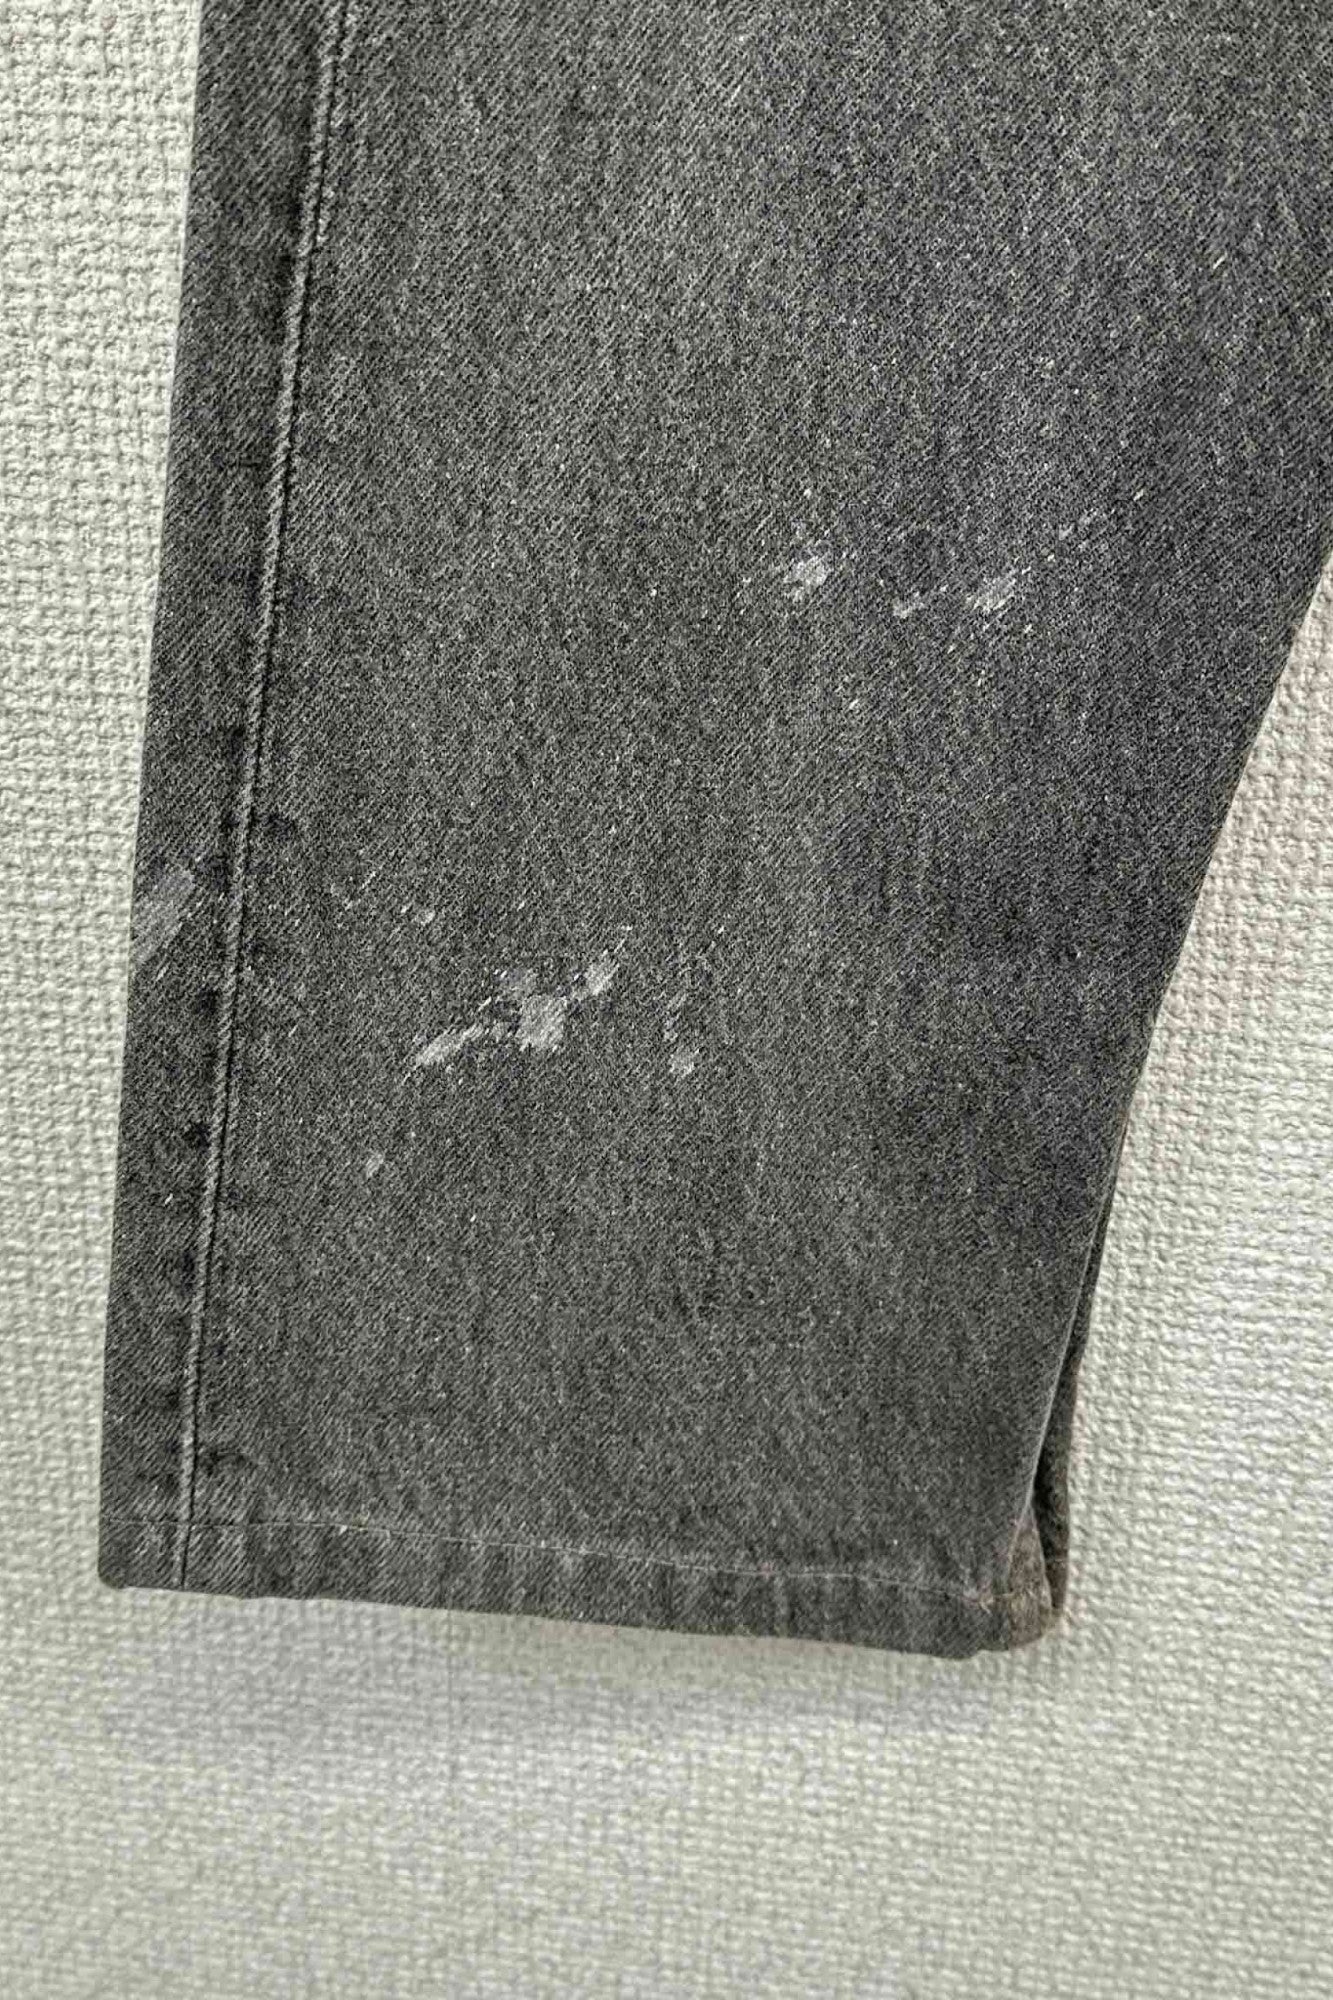 90's Made in USA Levi's 501 gray denim pants